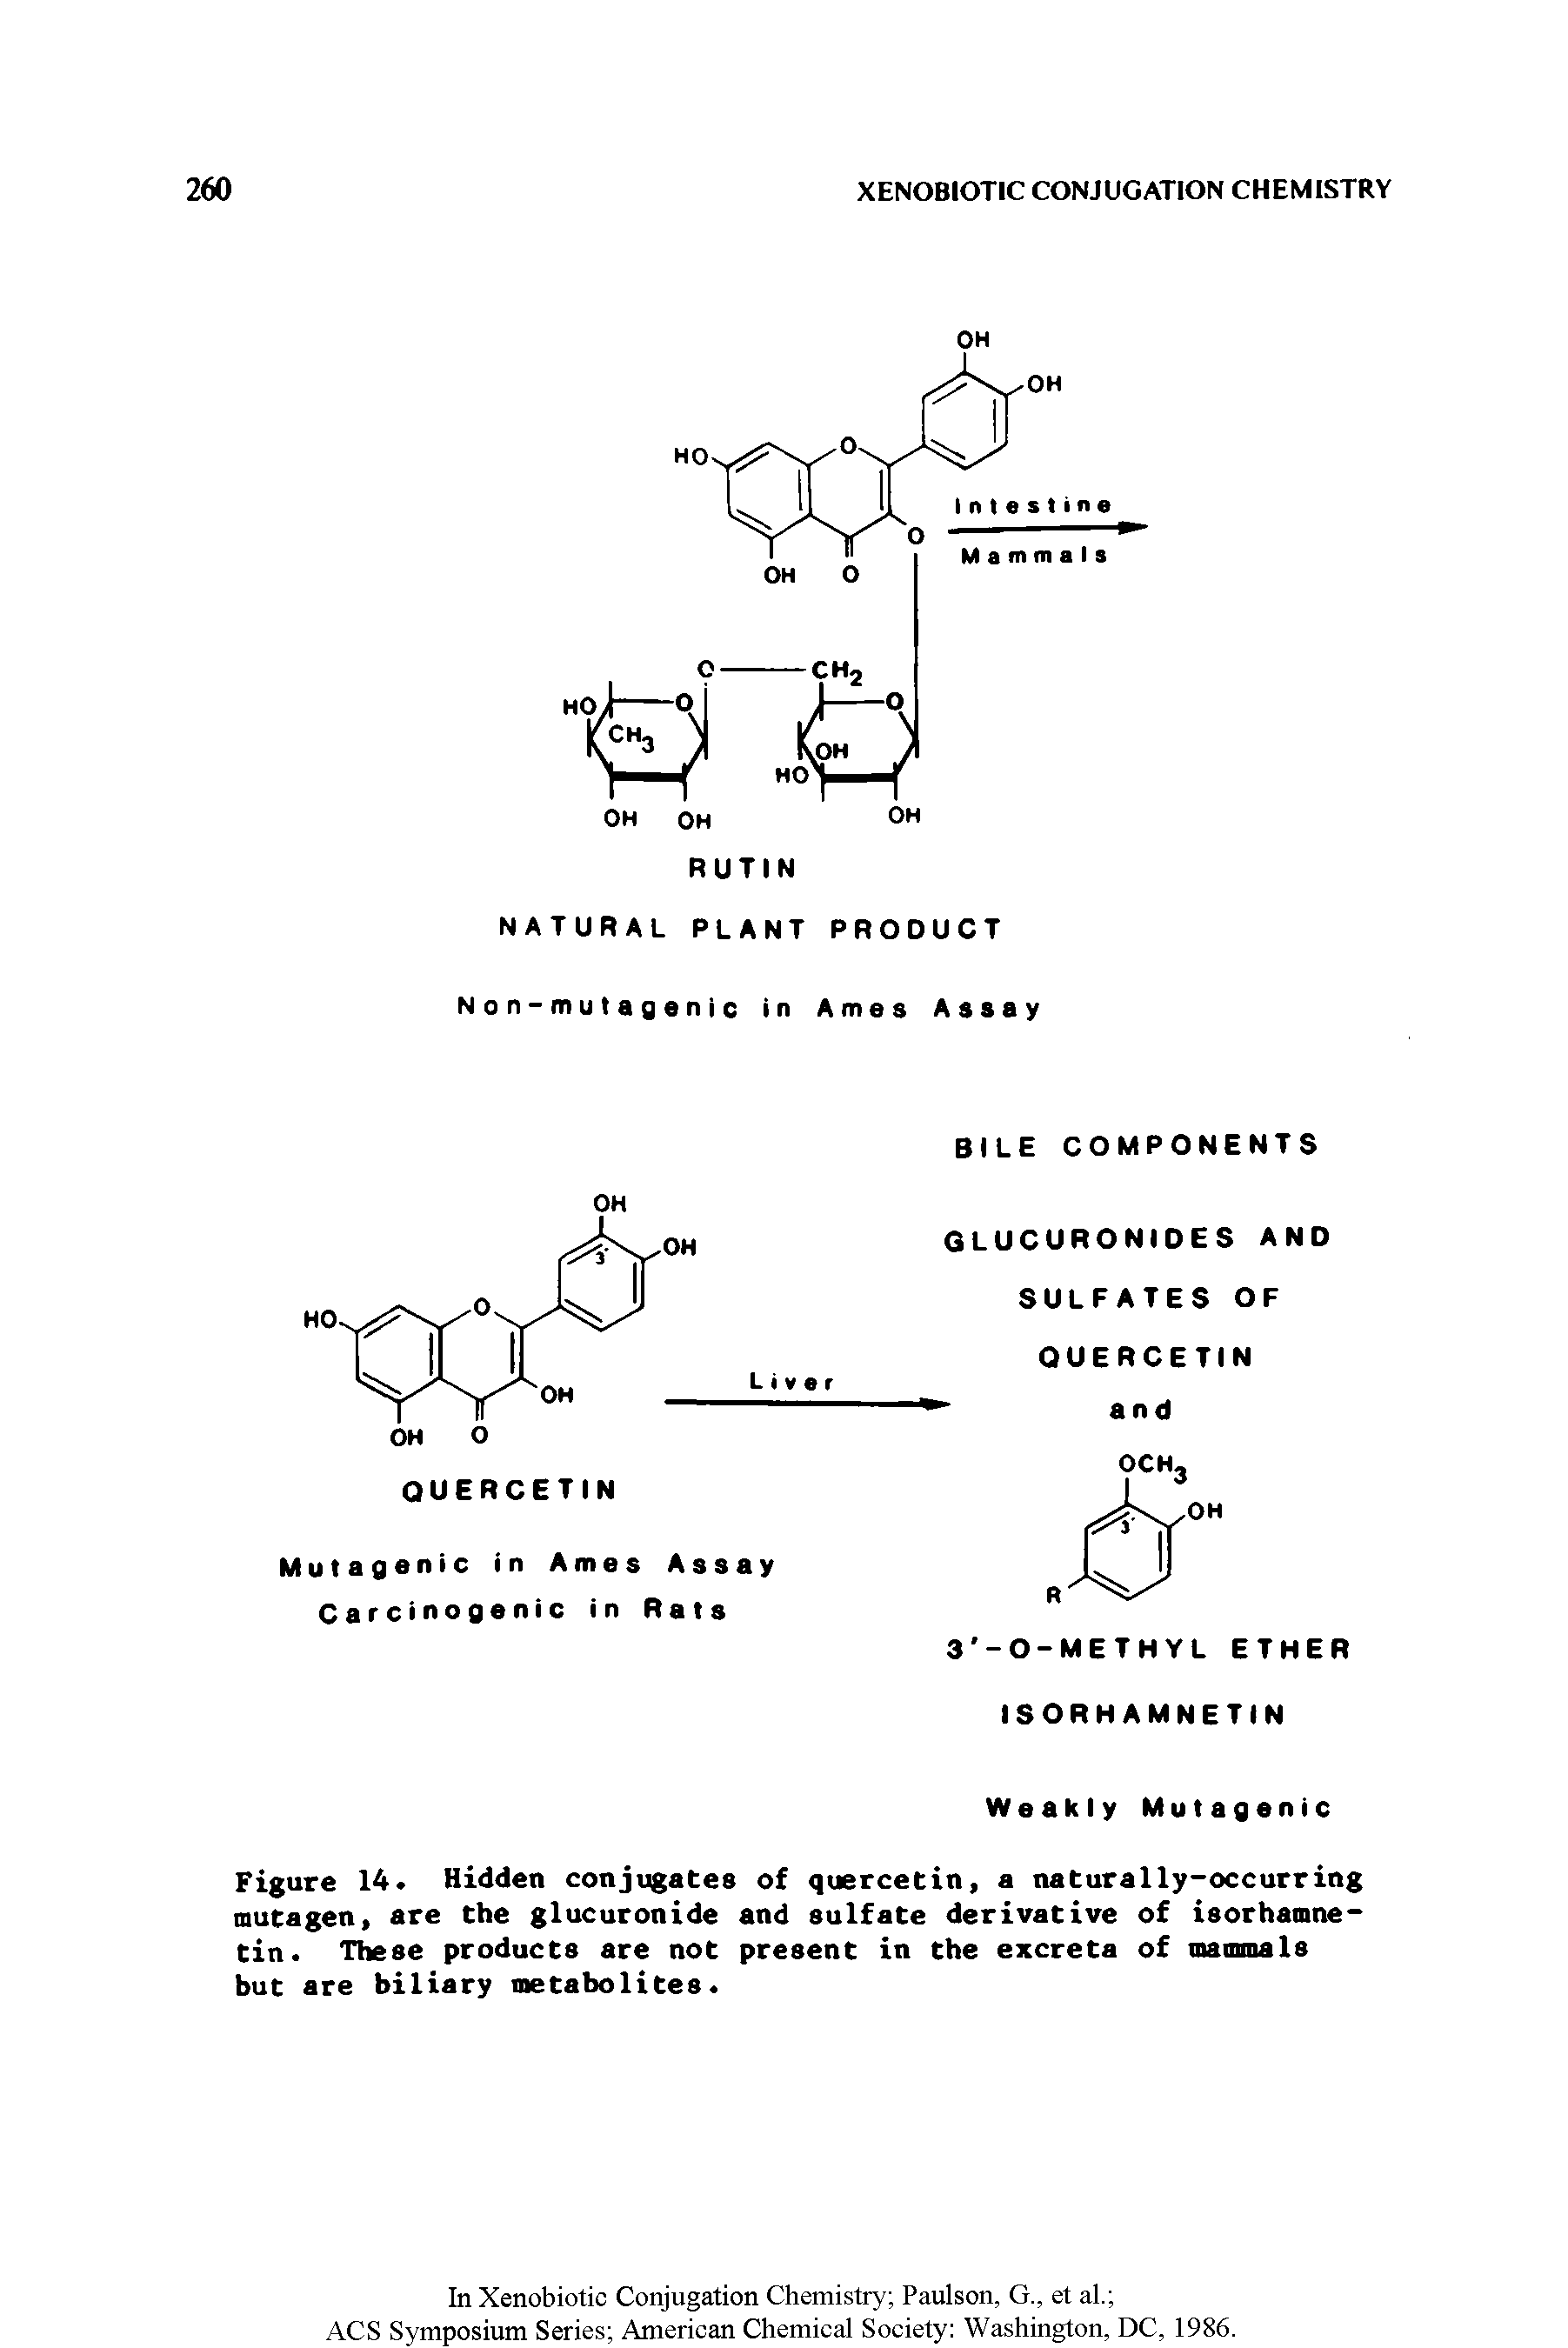 Figure 14- Hidden conjugates of quercetin, a naturally-occurring mutagen, are the glucuronide and sulfate derivative of isorhamnetin. These products are not present in the excreta of mammals but are biliary metabolites.